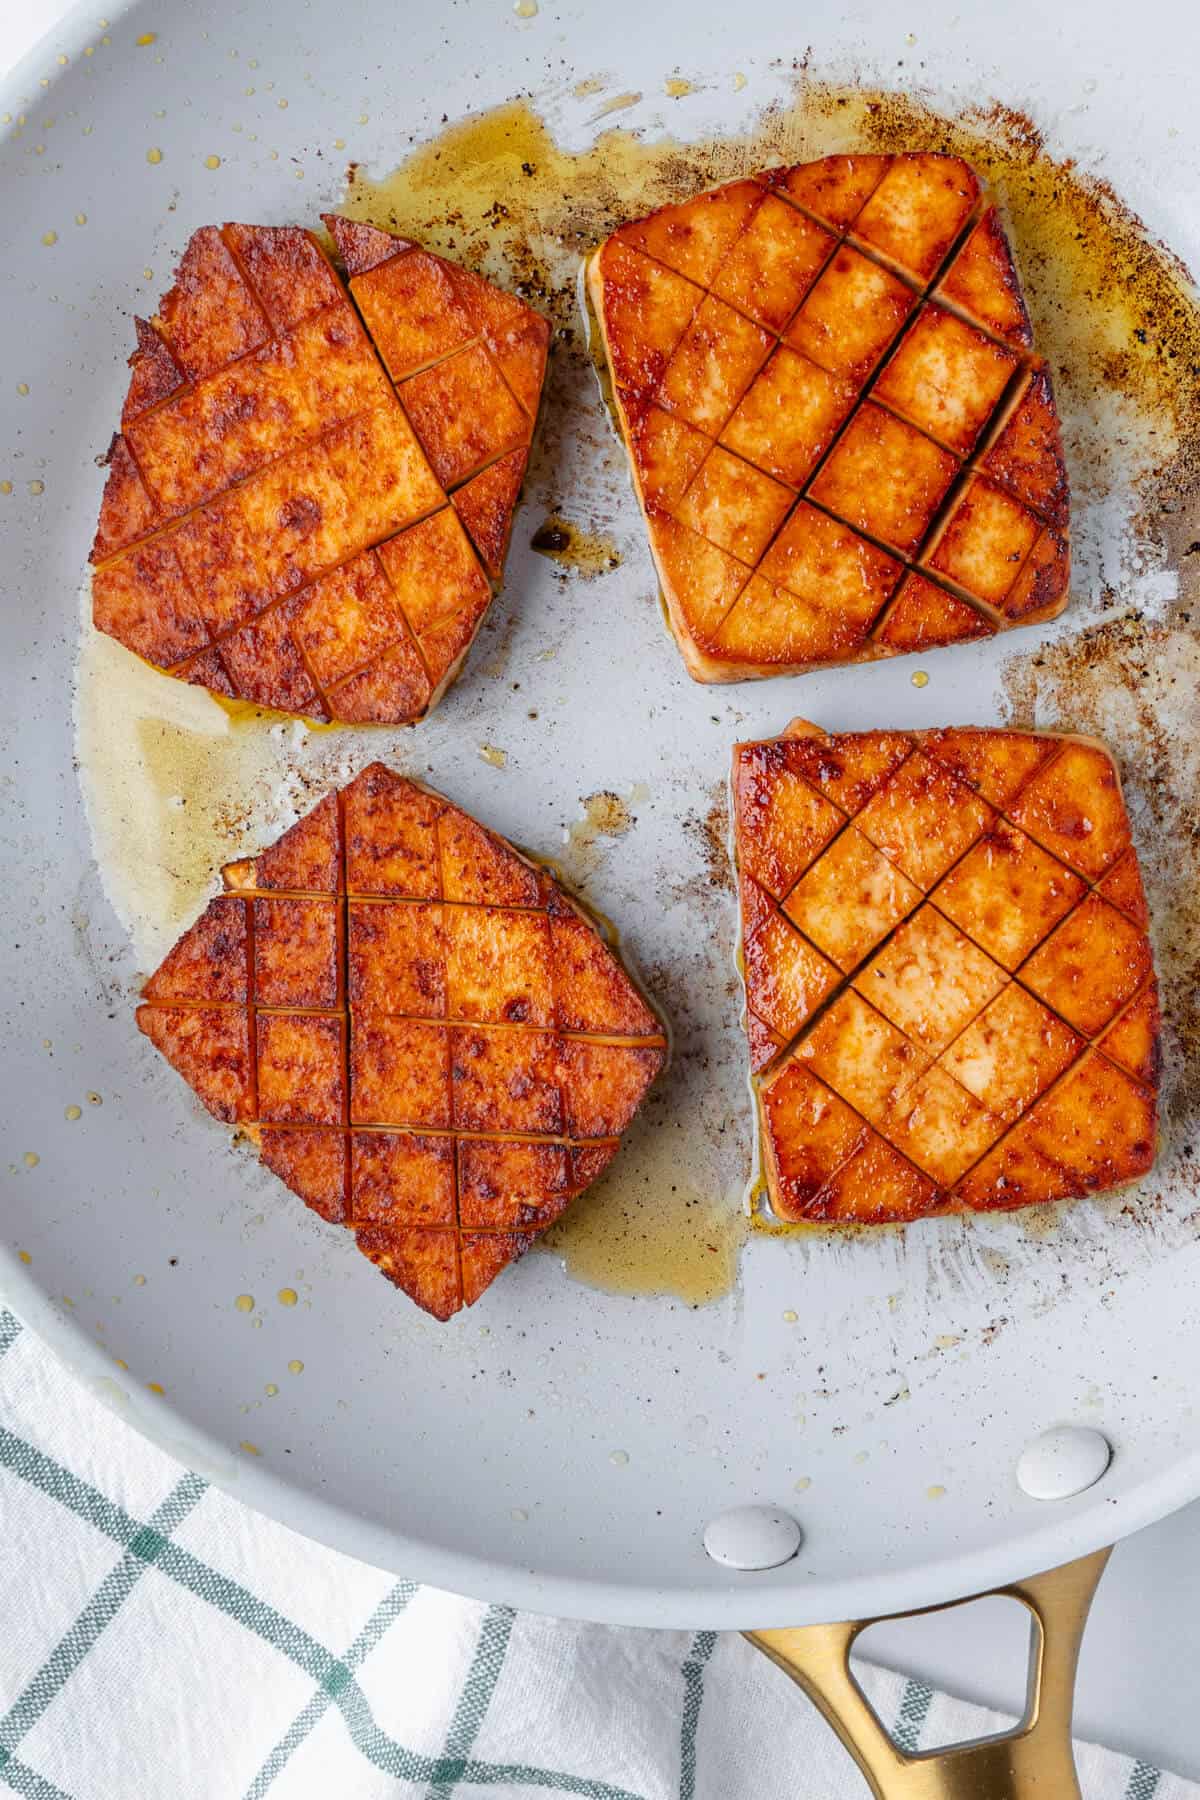 Cooked tofu steaks on a fry pan